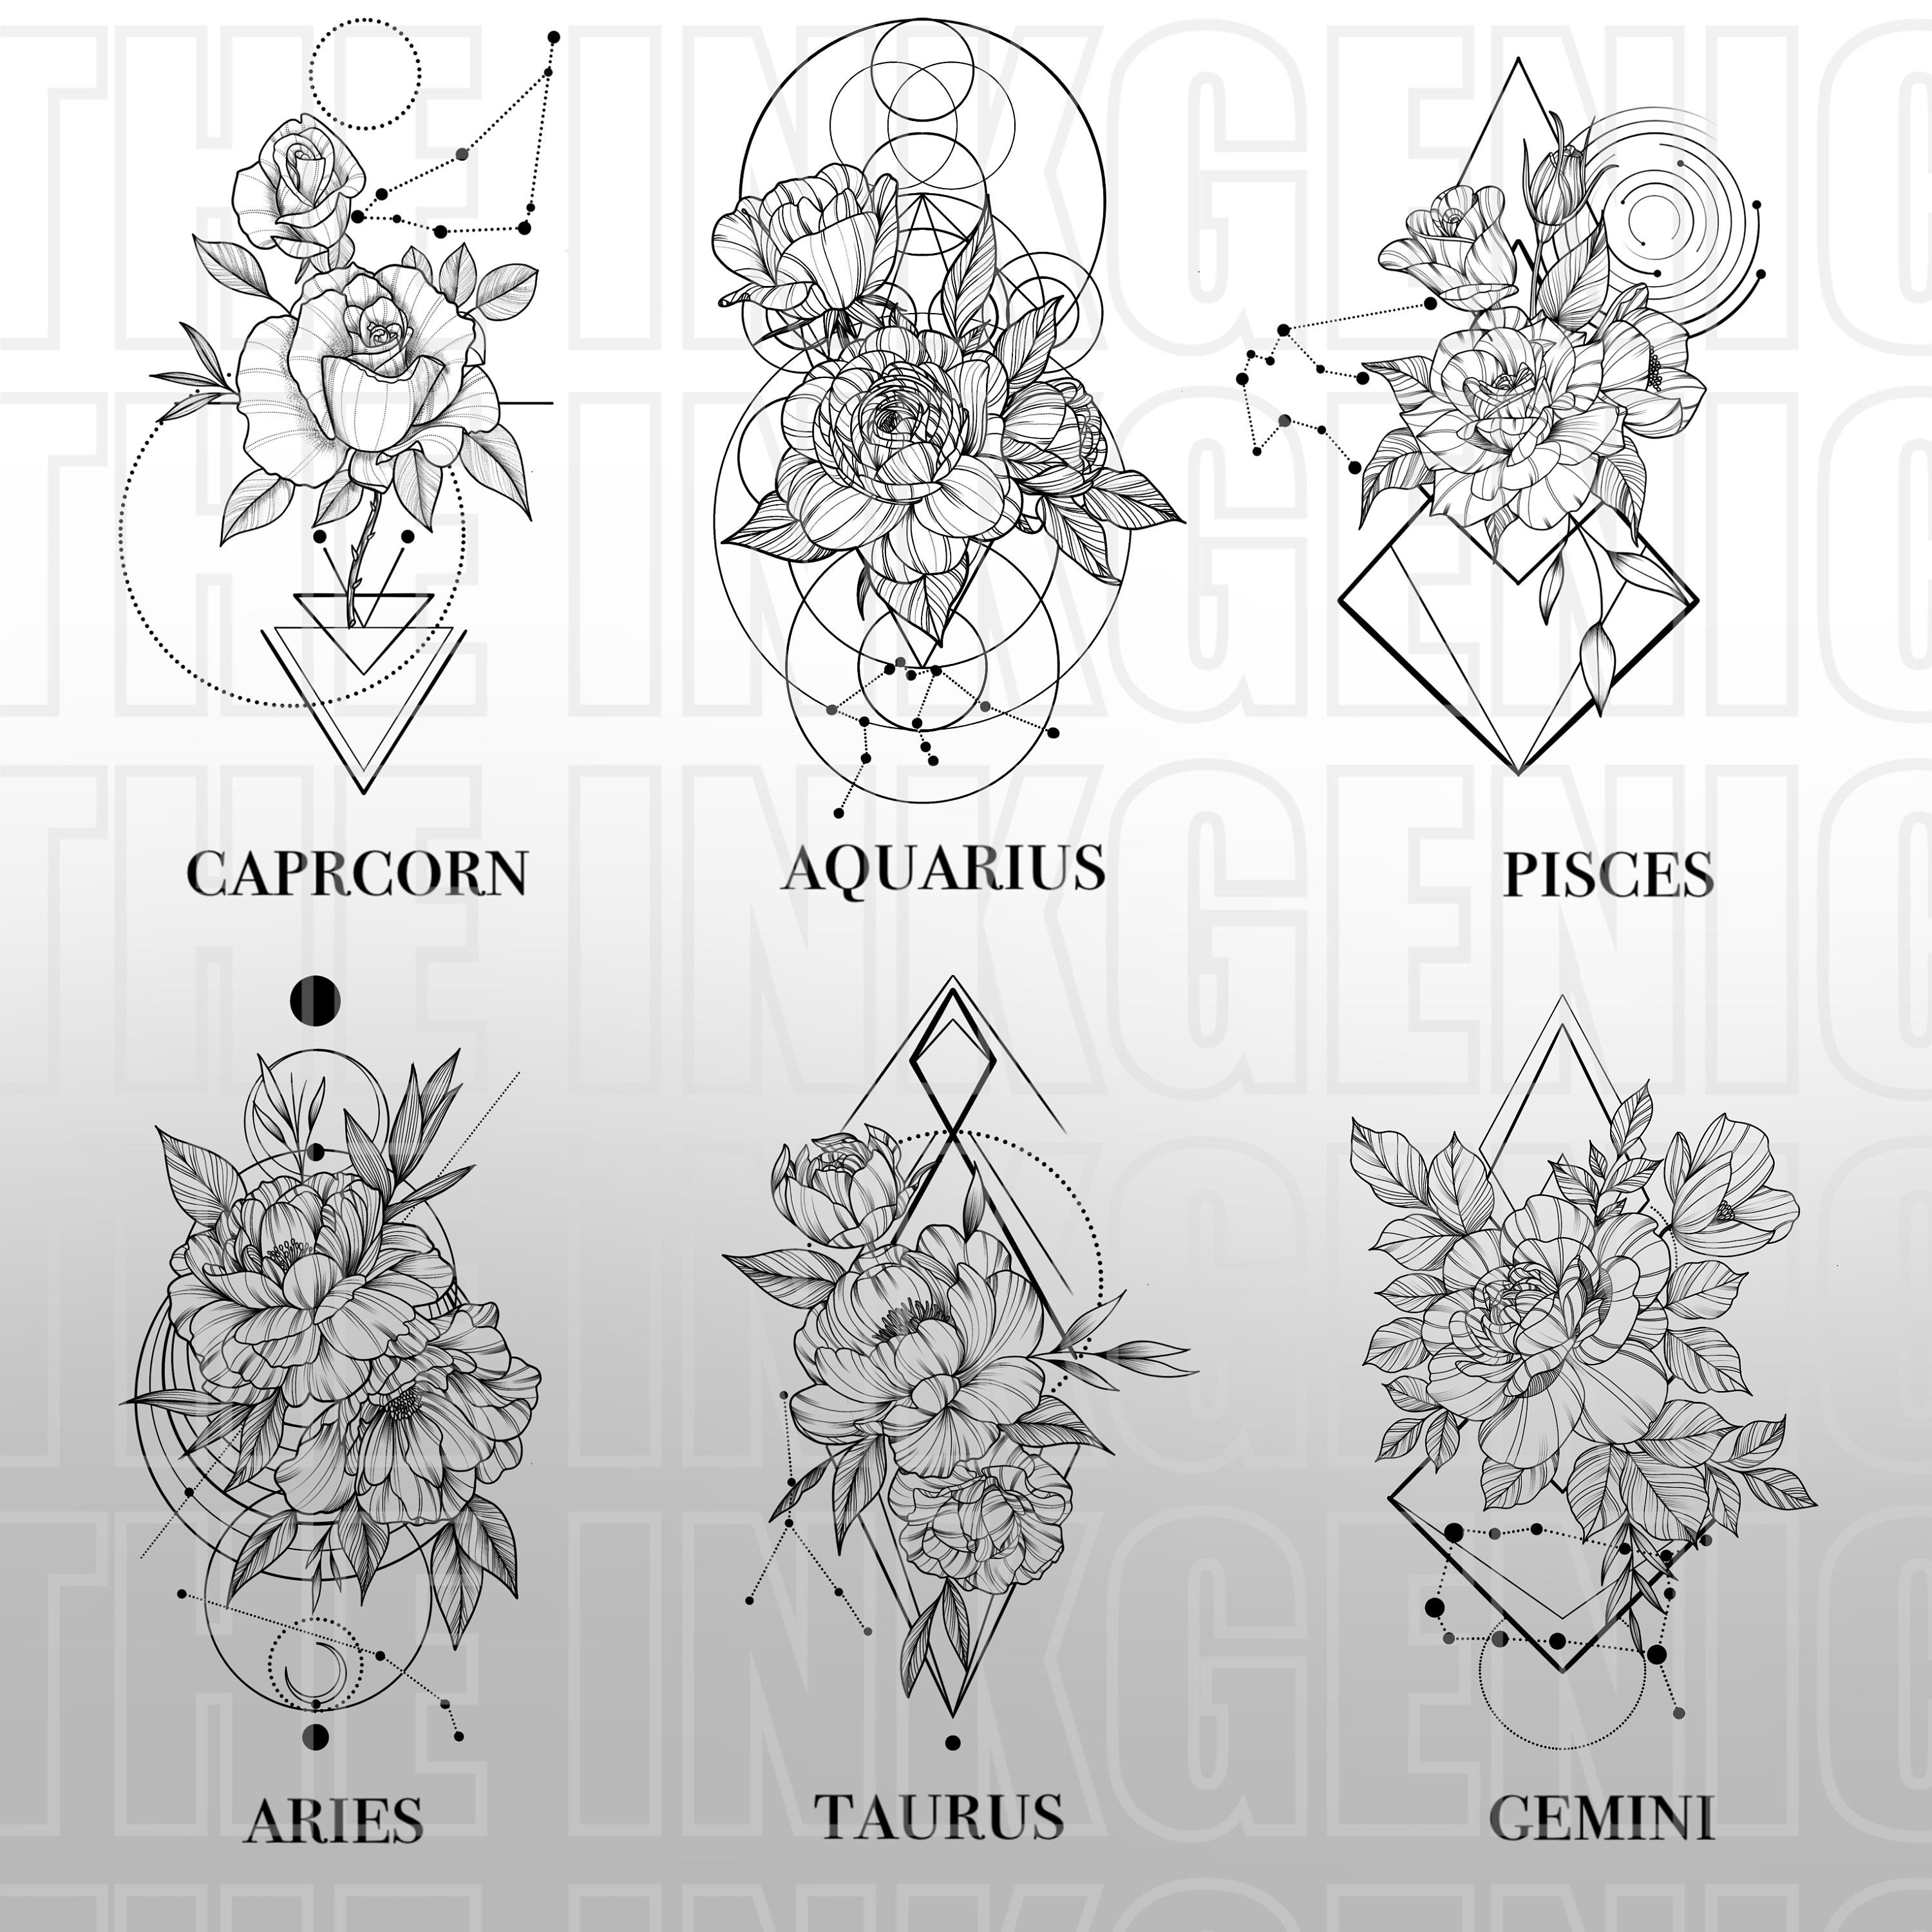 Simple Black And White Tattoo Sketch Of Gemini Horoscope Sign Vector  Illustration Royalty Free SVG, Cliparts, Vectors, and Stock Illustration.  Image 121018299.